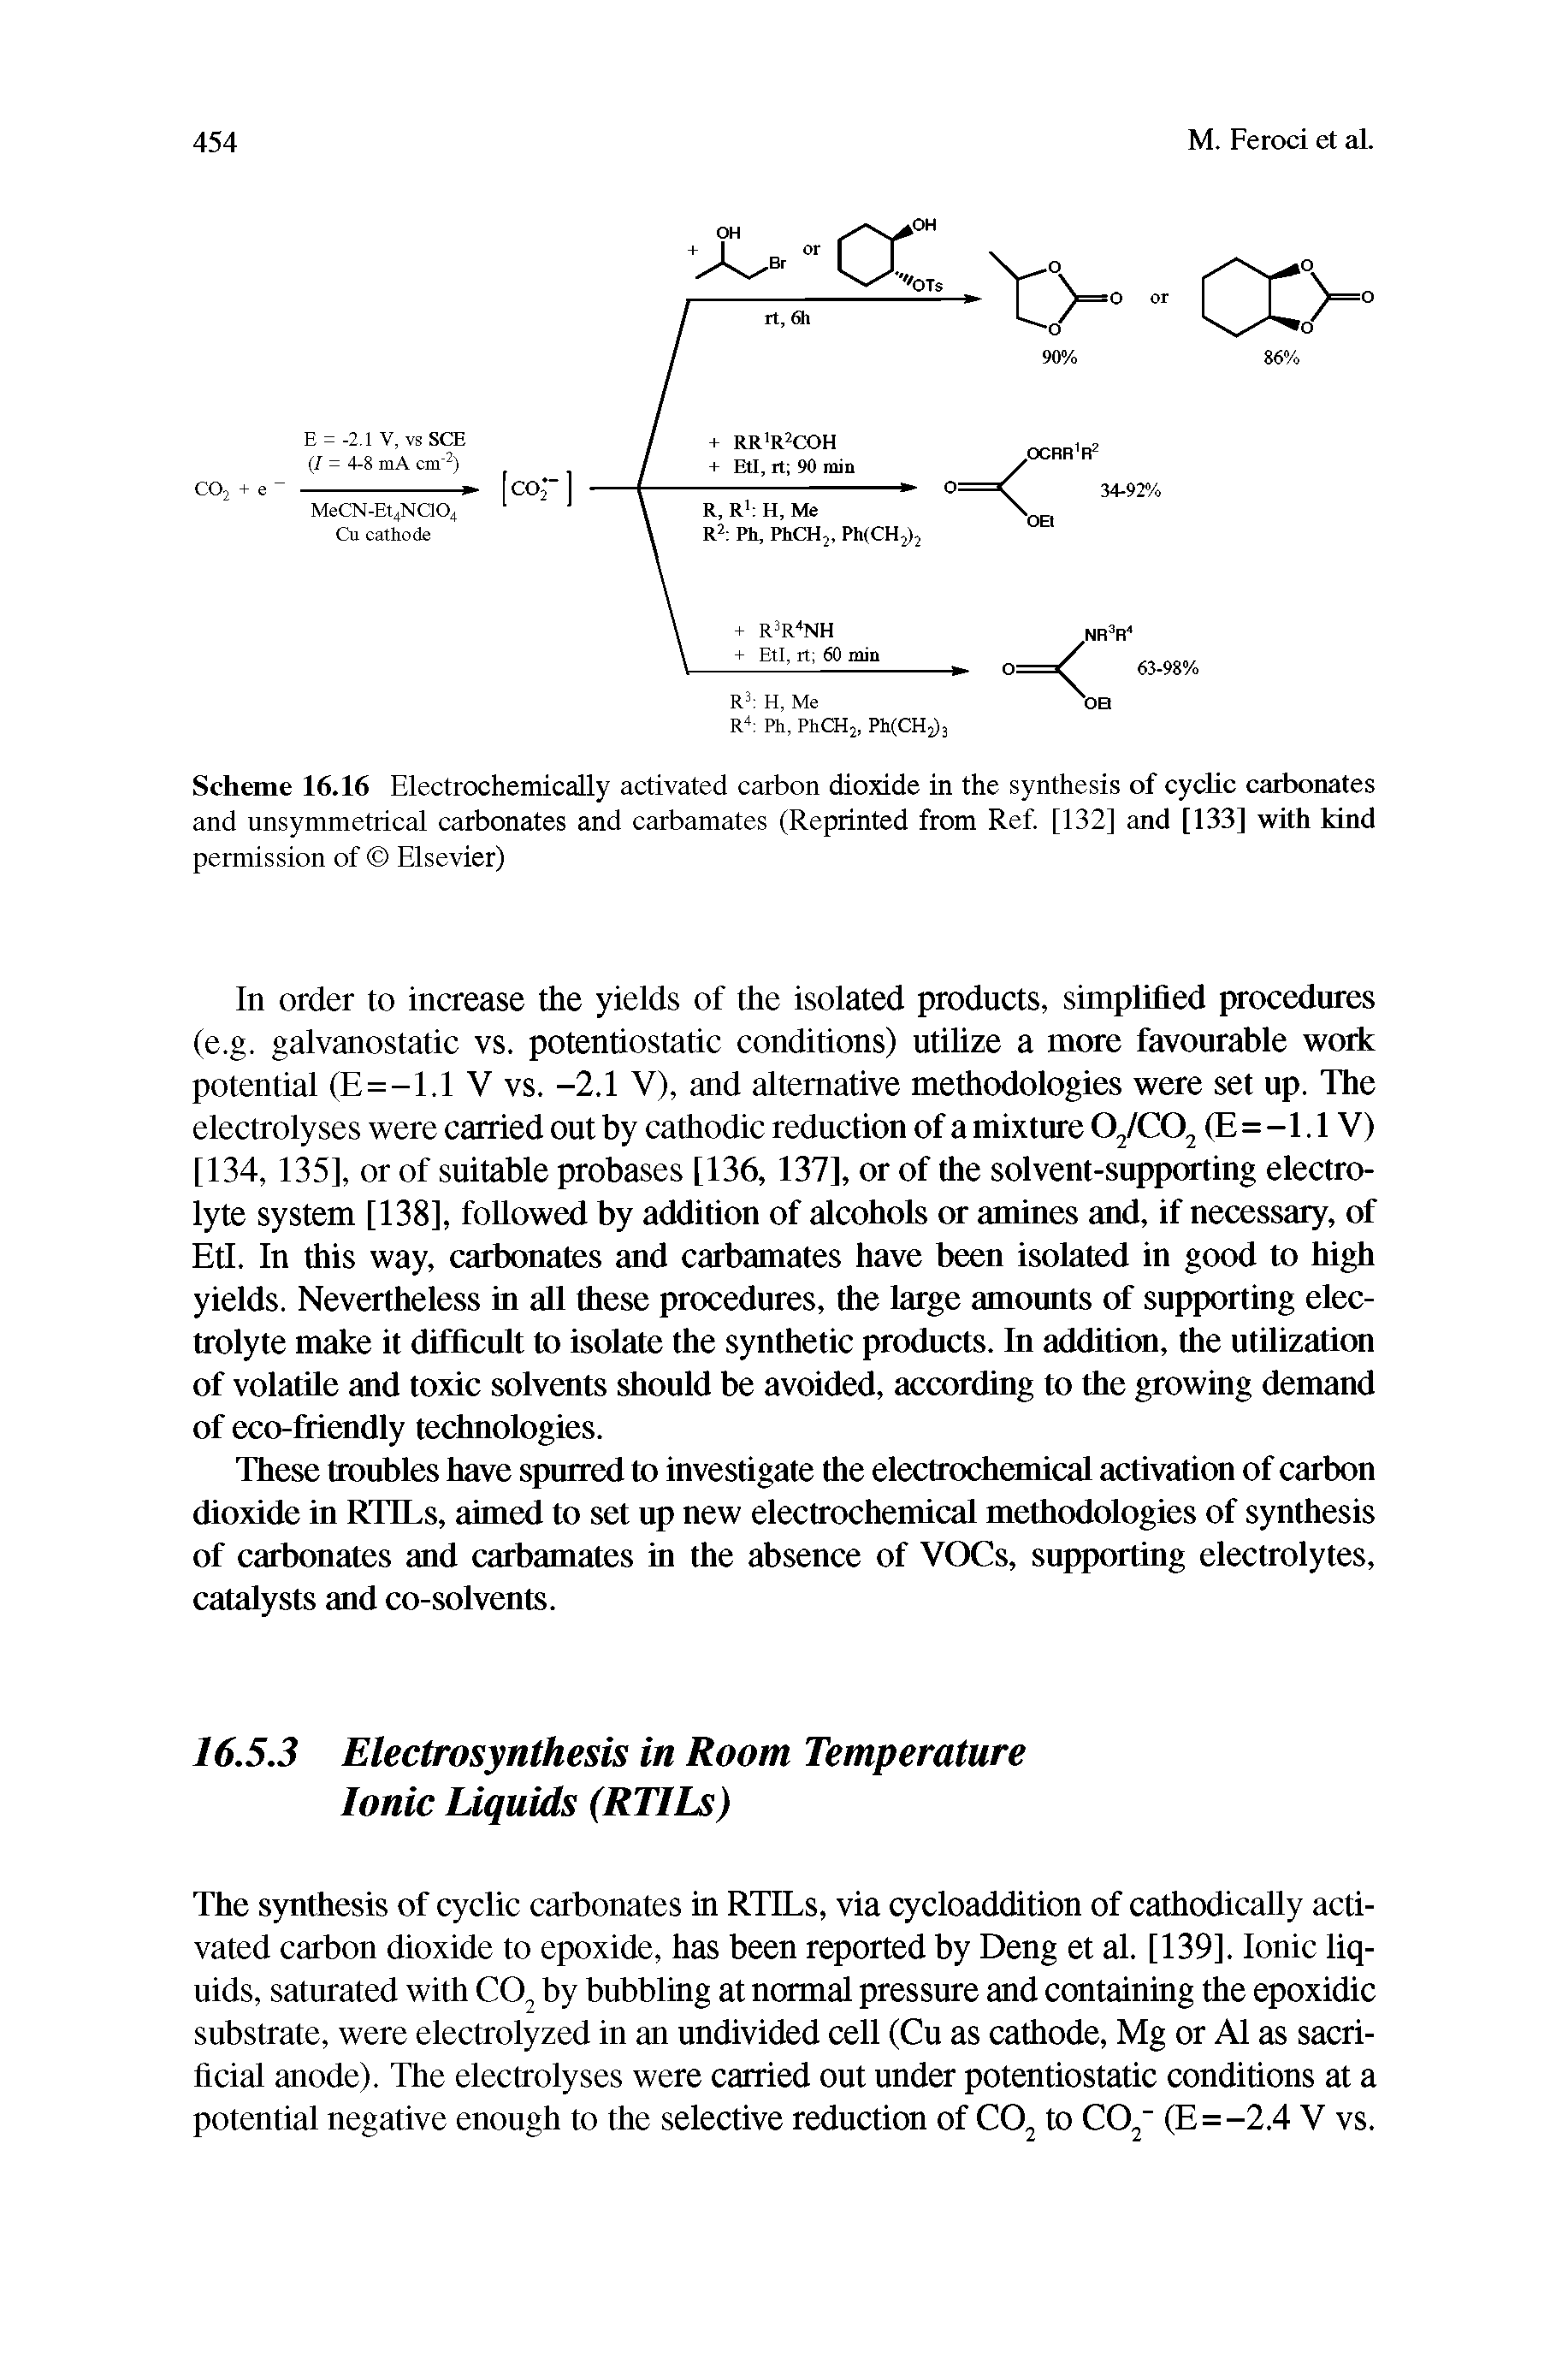 Scheme 16.16 Electrochemically activated carbon dioxide in the synthesis of cyclic carbonates and unsymmetiical carbonates and carbamates (Reprinted from Ref. [132] and [133] with kind permission of Elsevier)...